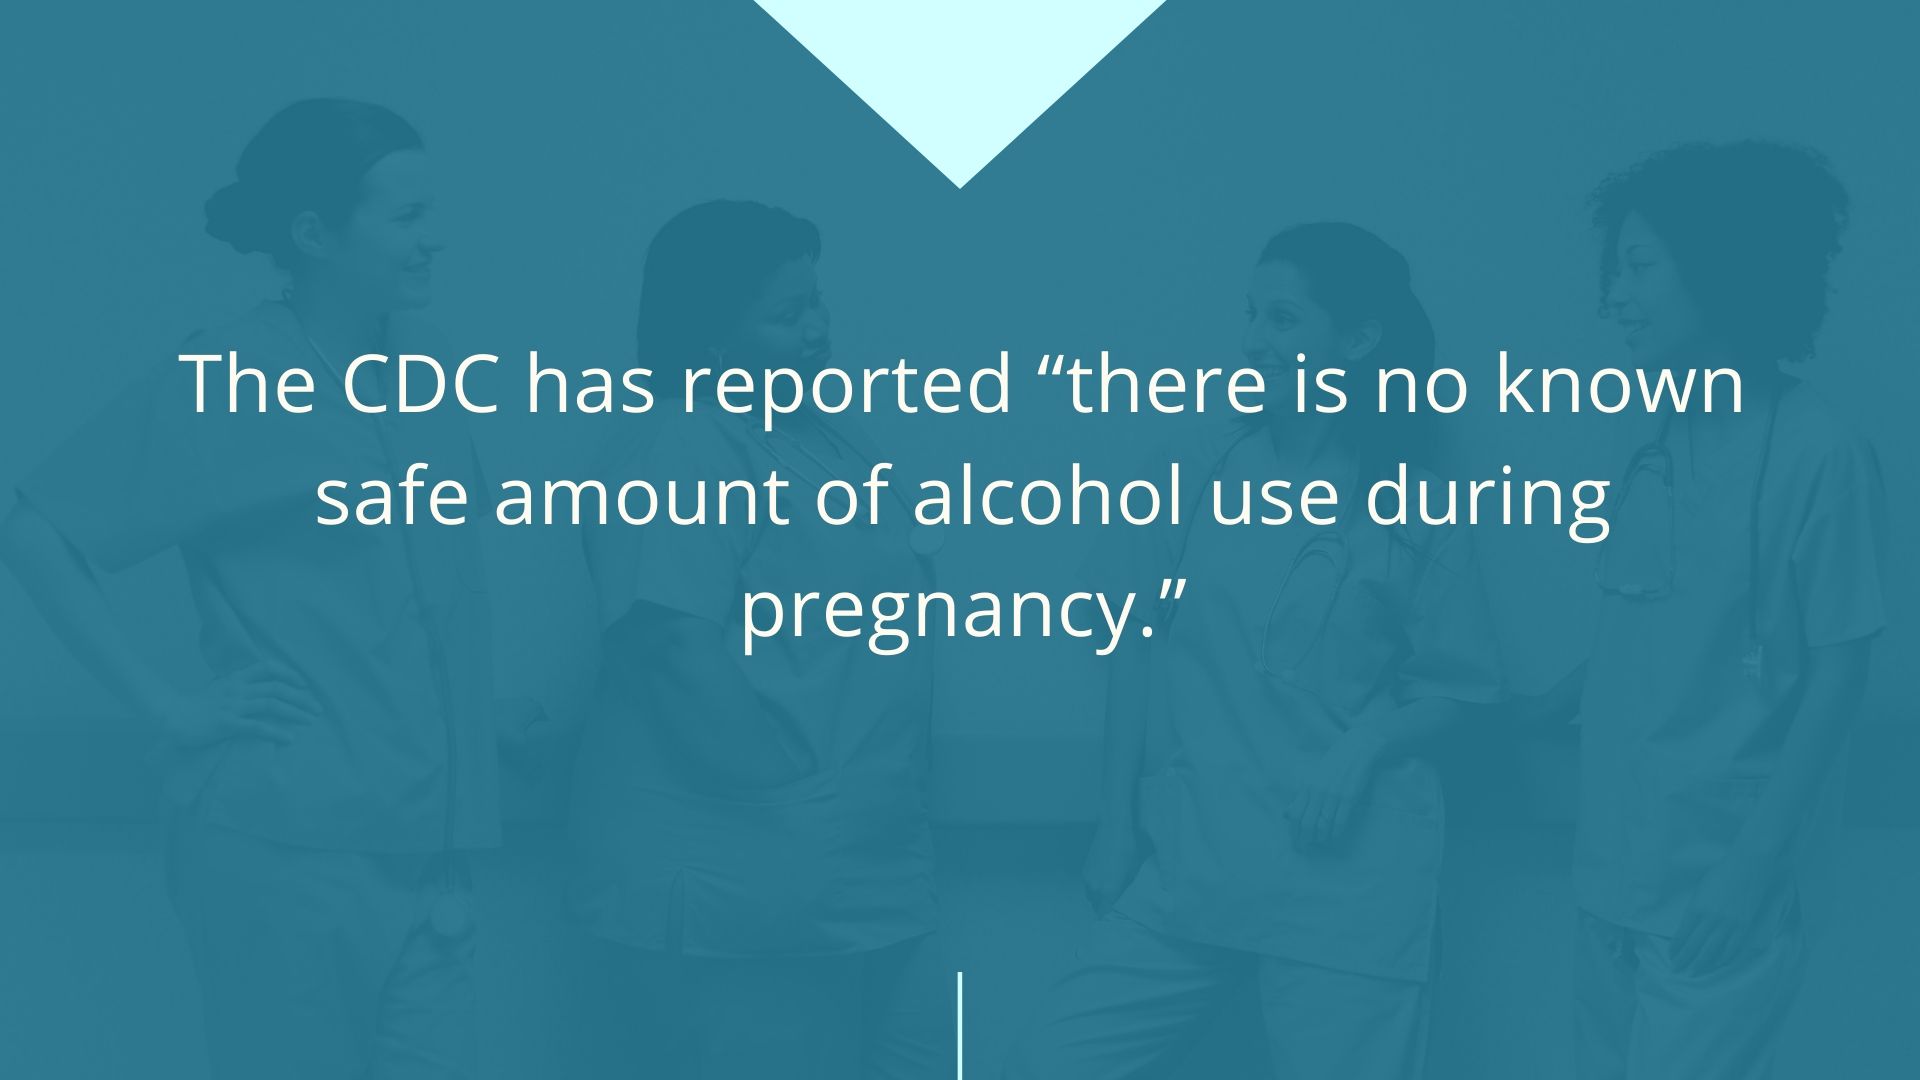 cdc report on alcohol use during pregnancy 